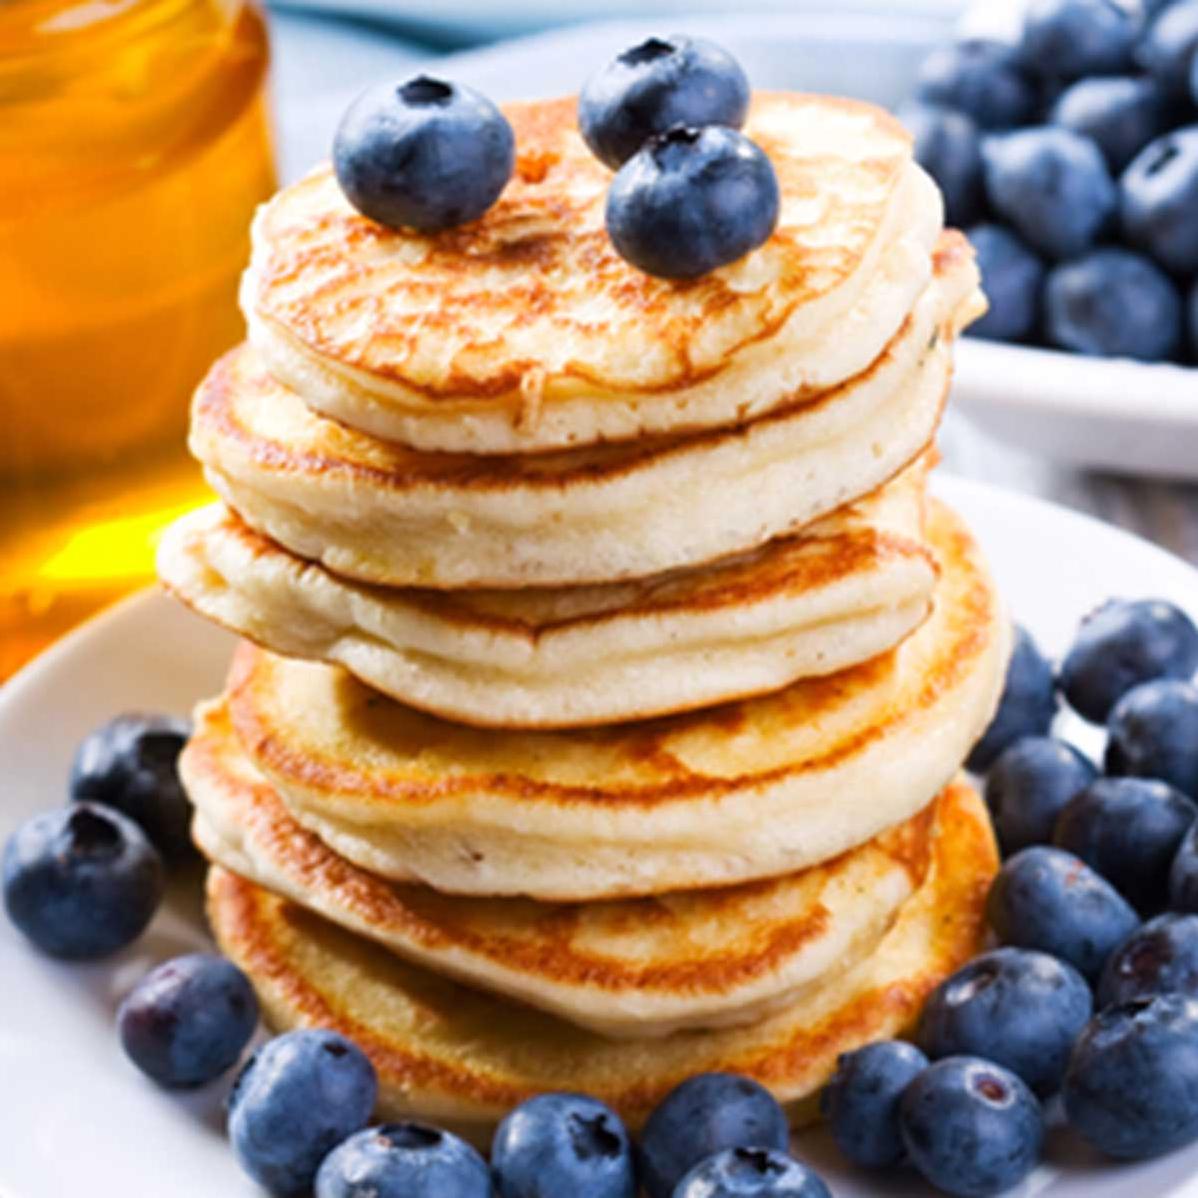  Who said gluten-free pancakes can't be delicious?